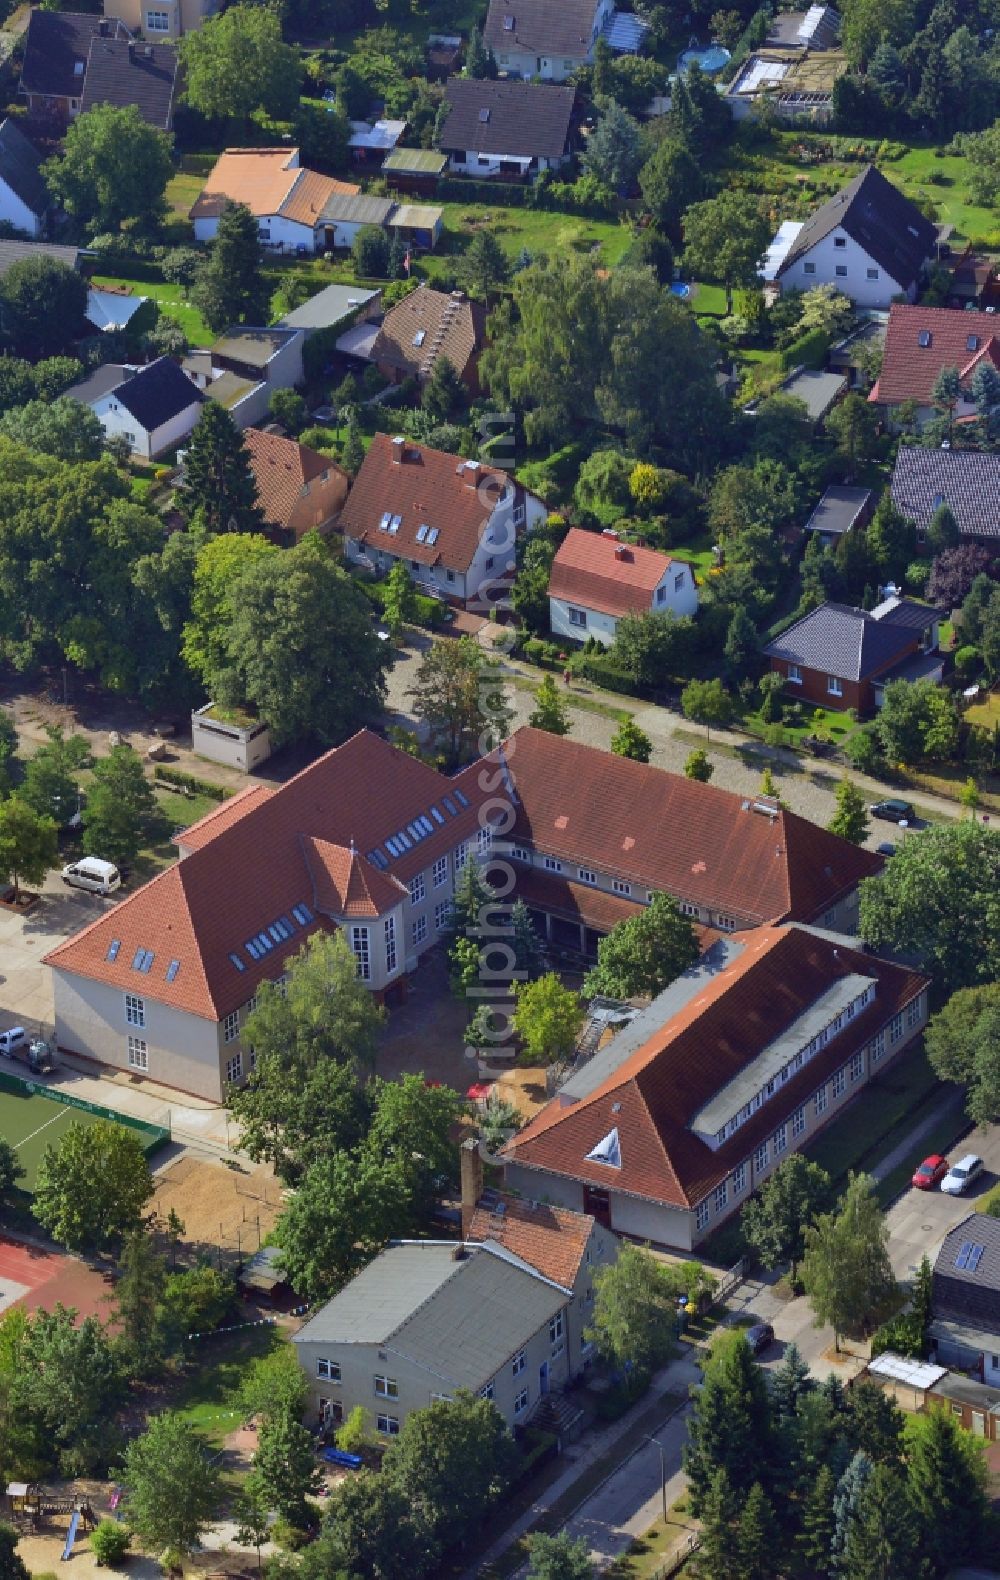 Berlin-Mahlsdorf from the bird's eye view: The buildings and the area of the BEST-Sabel-primary school in Berlin-Mahlsdorf. It is a Wolfgang Gerbere full-time school with adjecent athletic ground